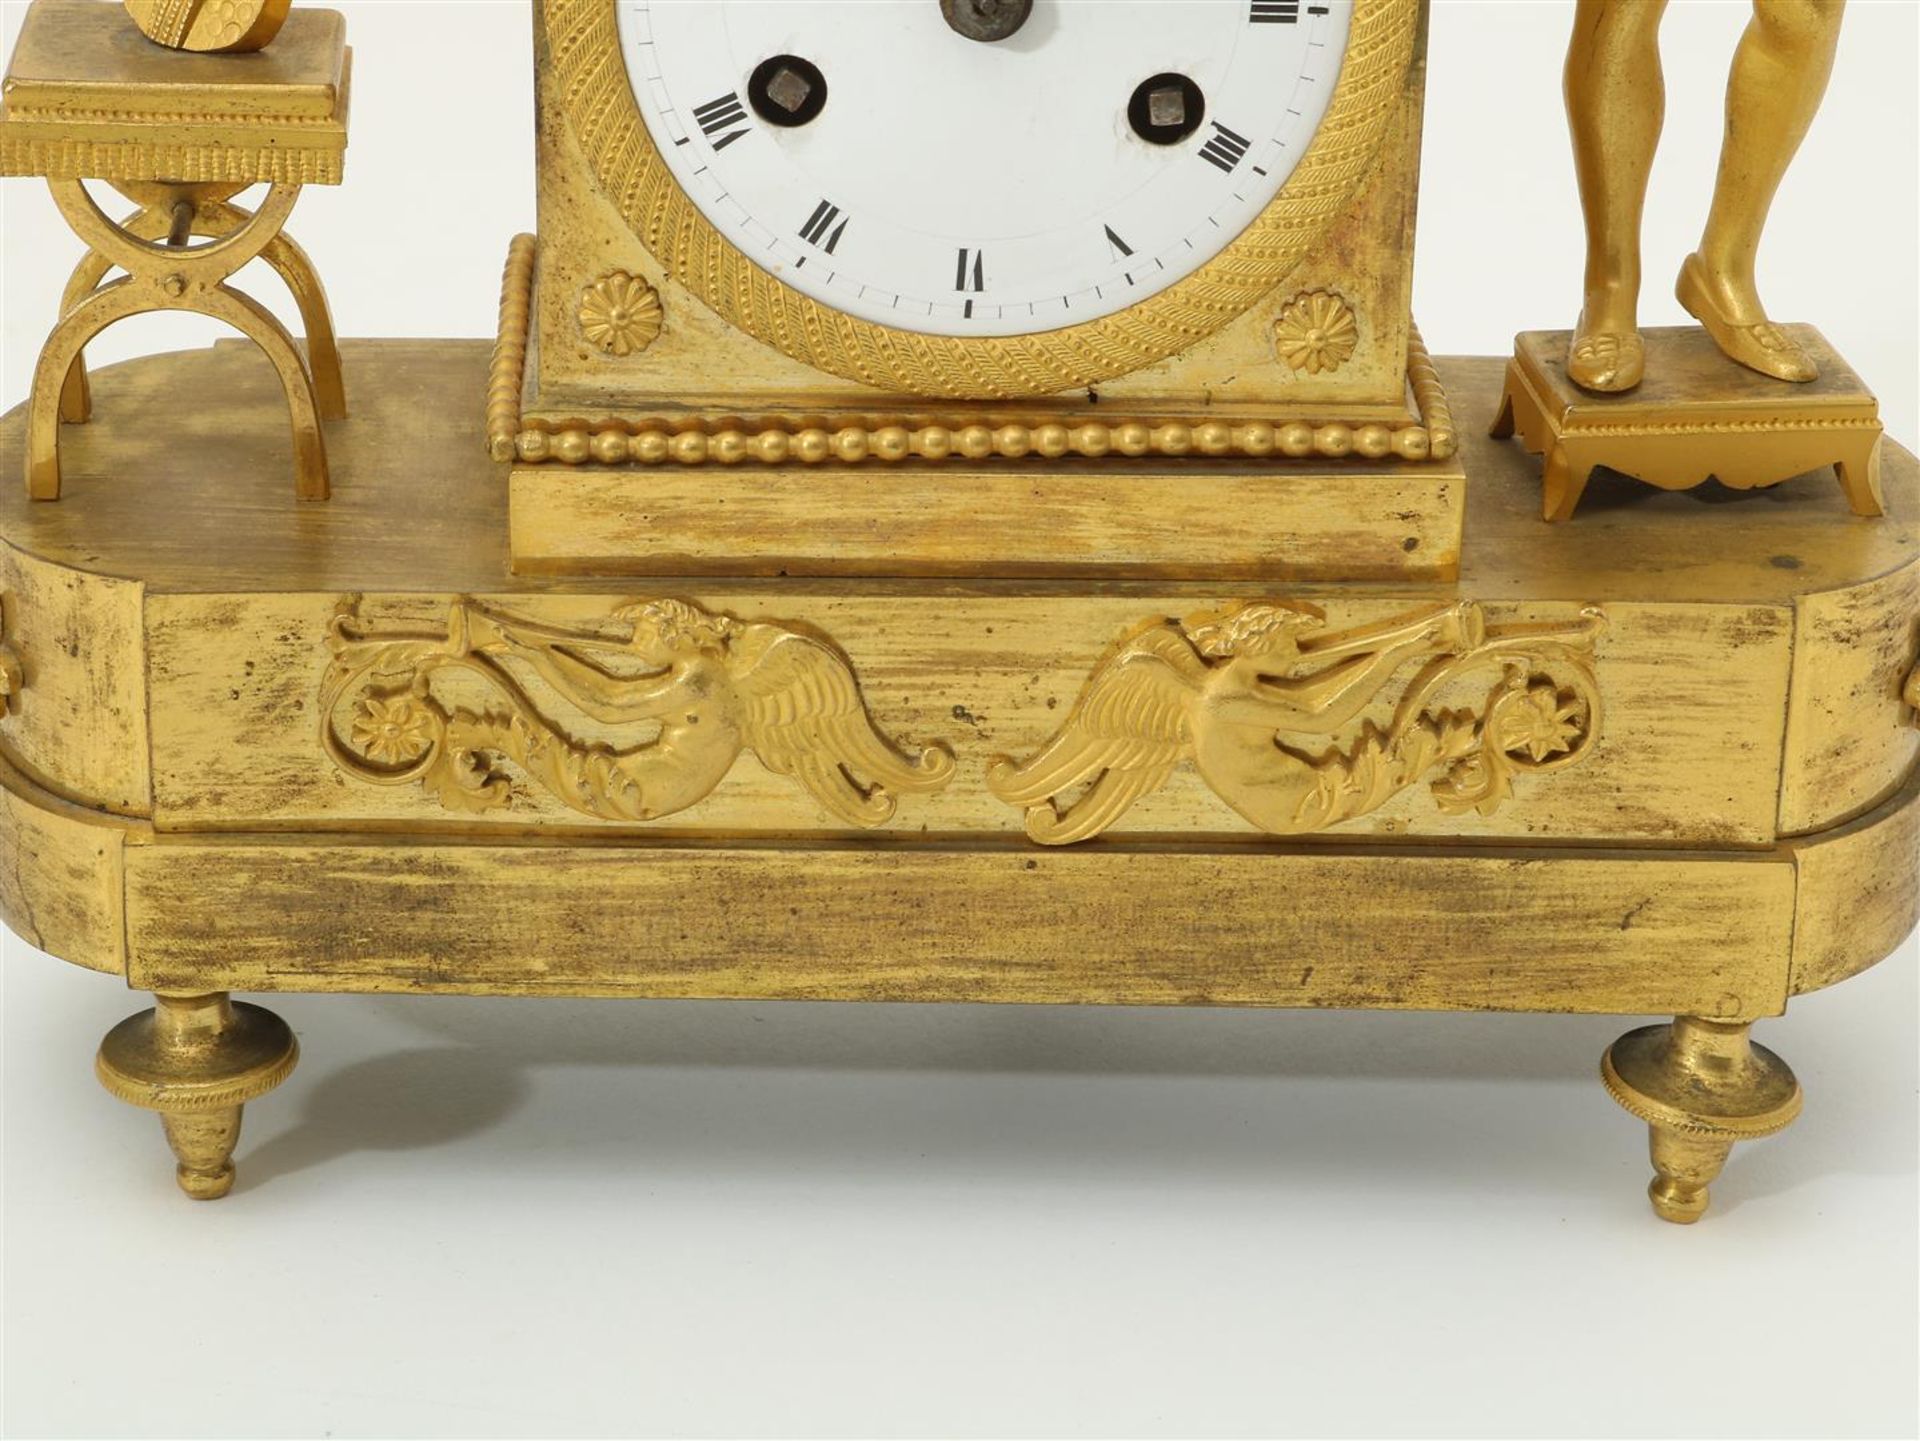 Fire-gilt Empire mantel clock with musician and sheet music, with running and percussion - Image 5 of 7